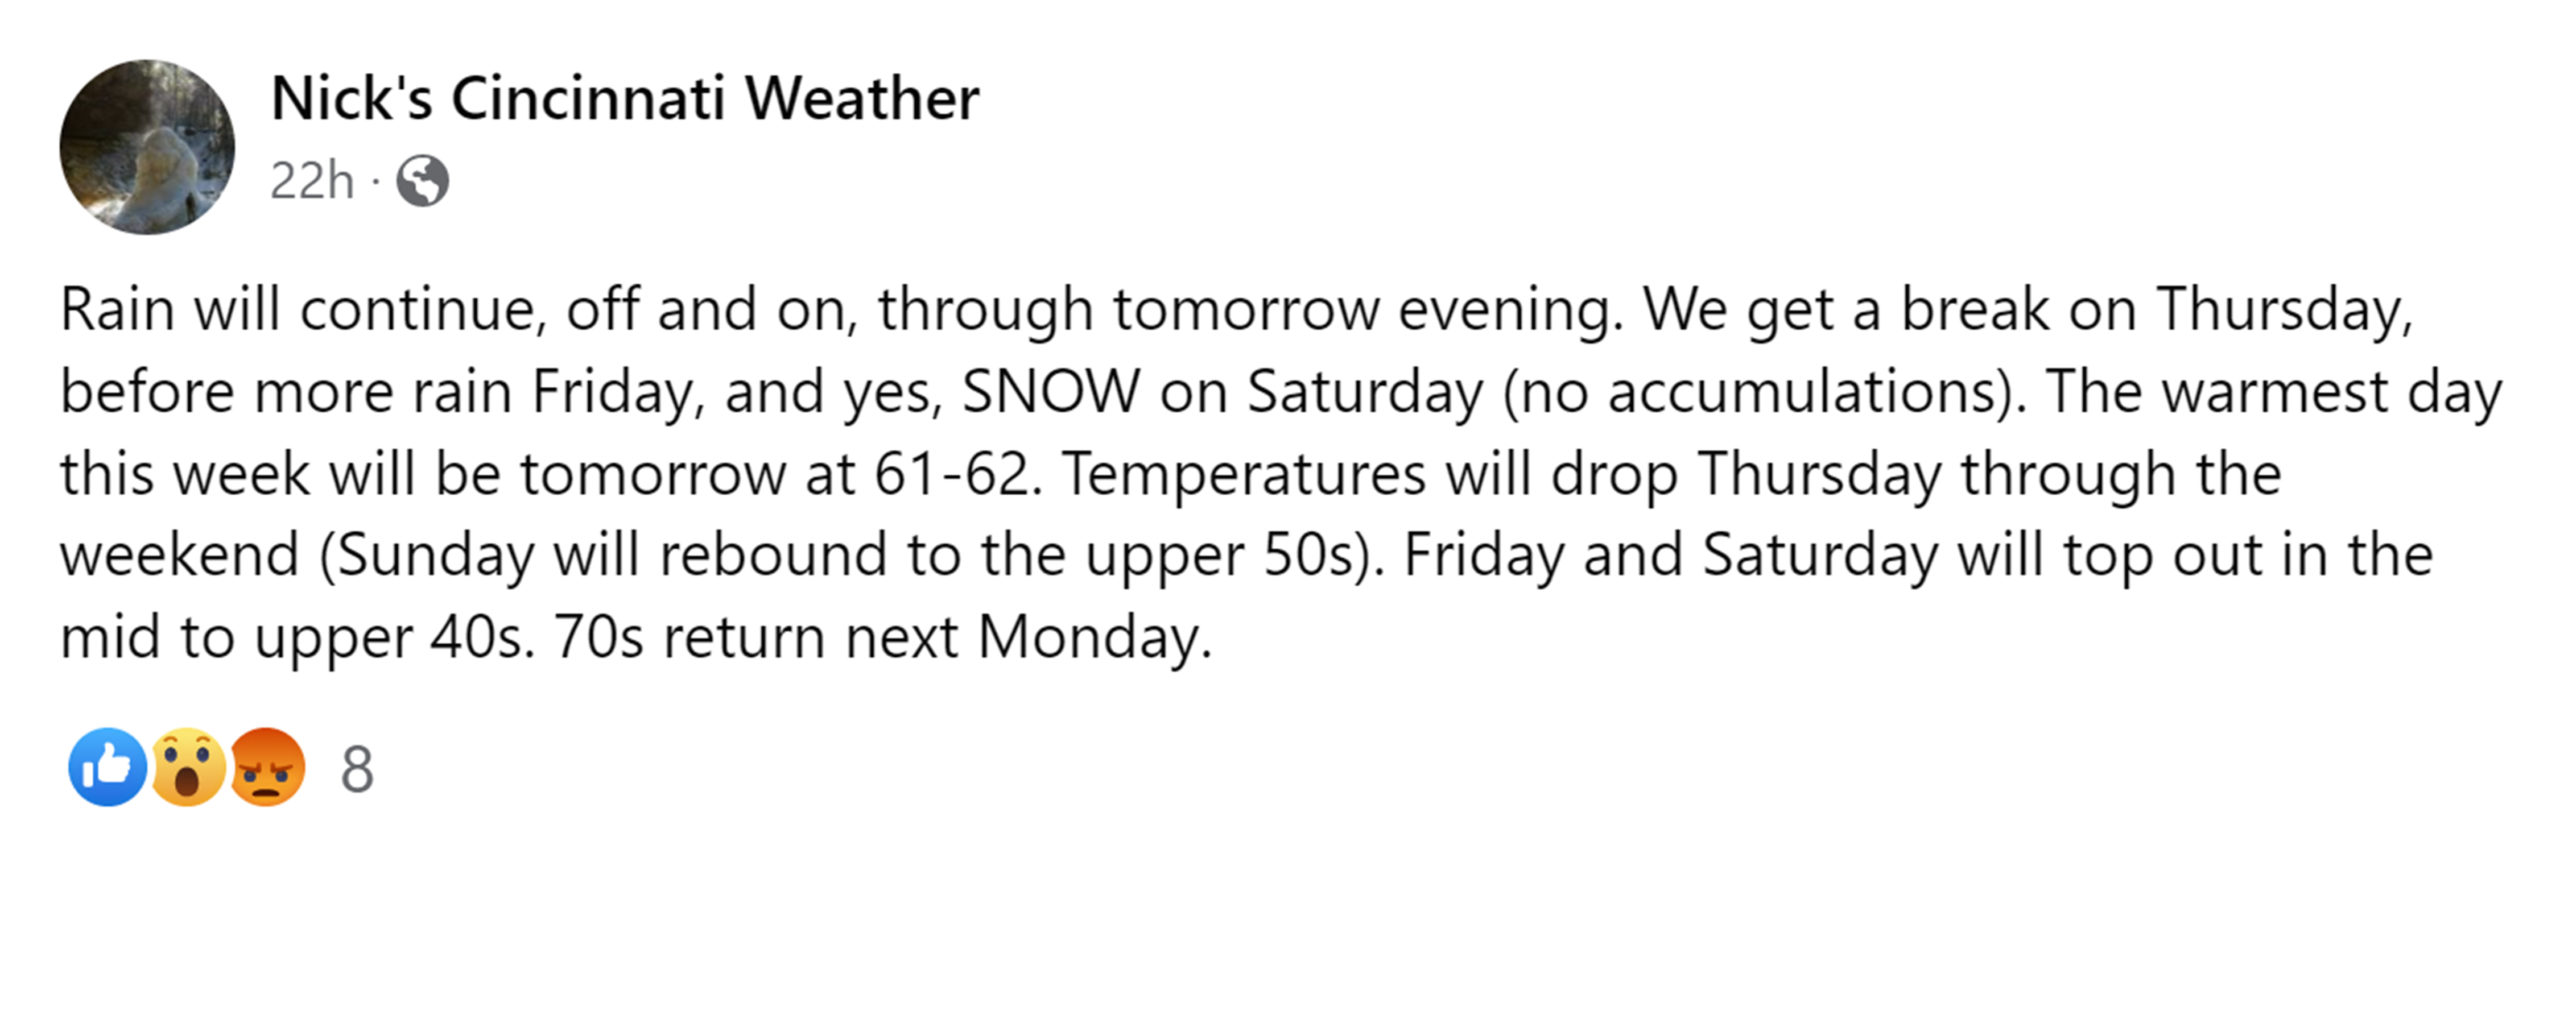 Screenshot of a Facebook post from a local meteorologist named Nick that shares the forecast for Cincinnati over the next week. It will be cold and rainy a lot with a chance of snow.